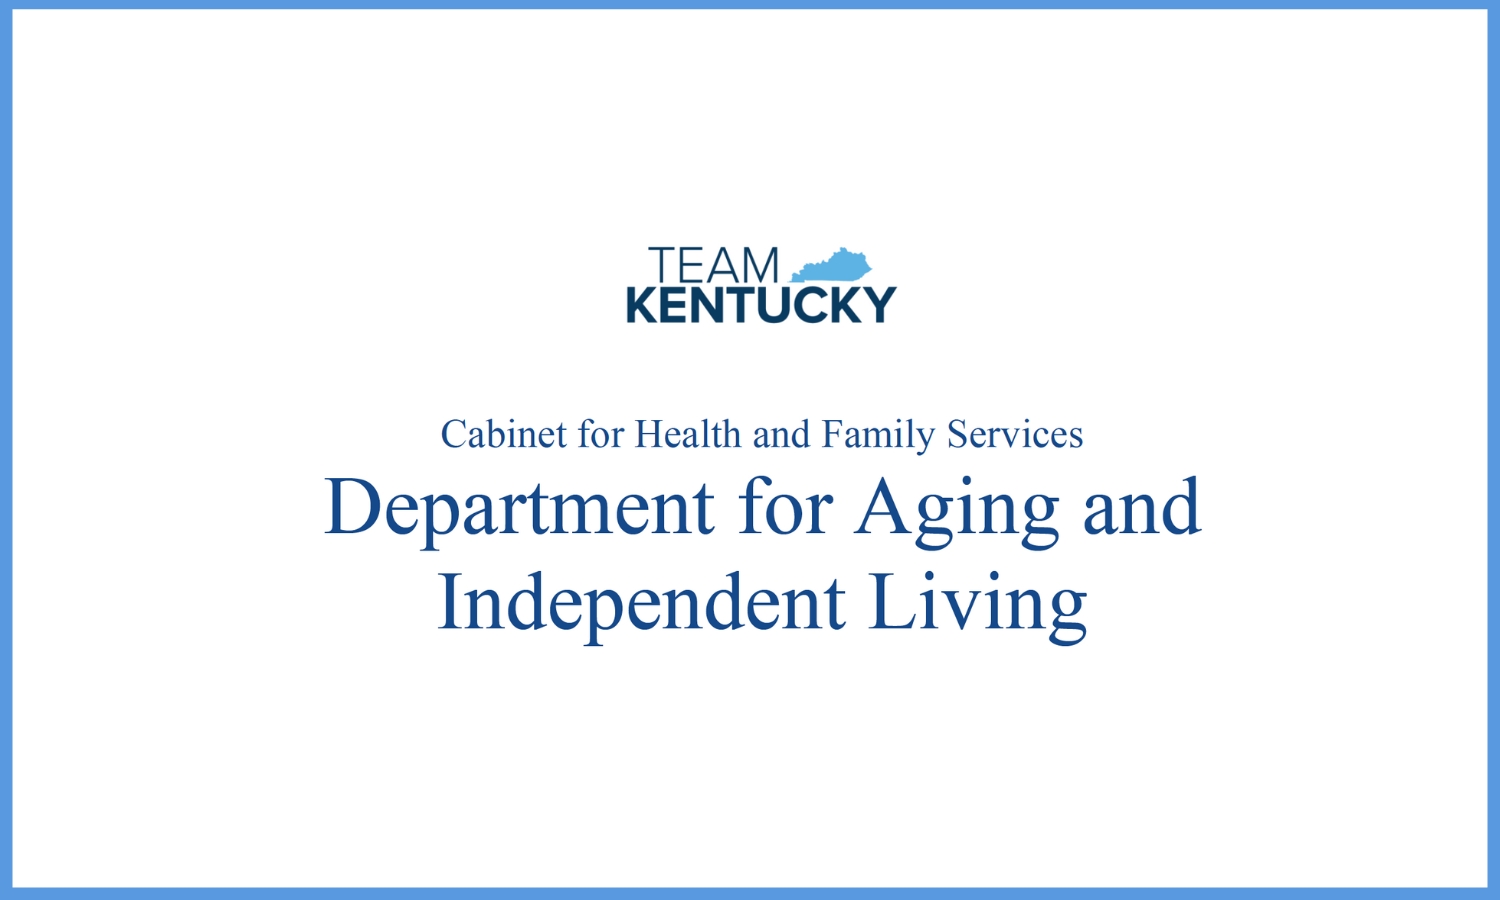 KY Department for Aging and Independent Living logo